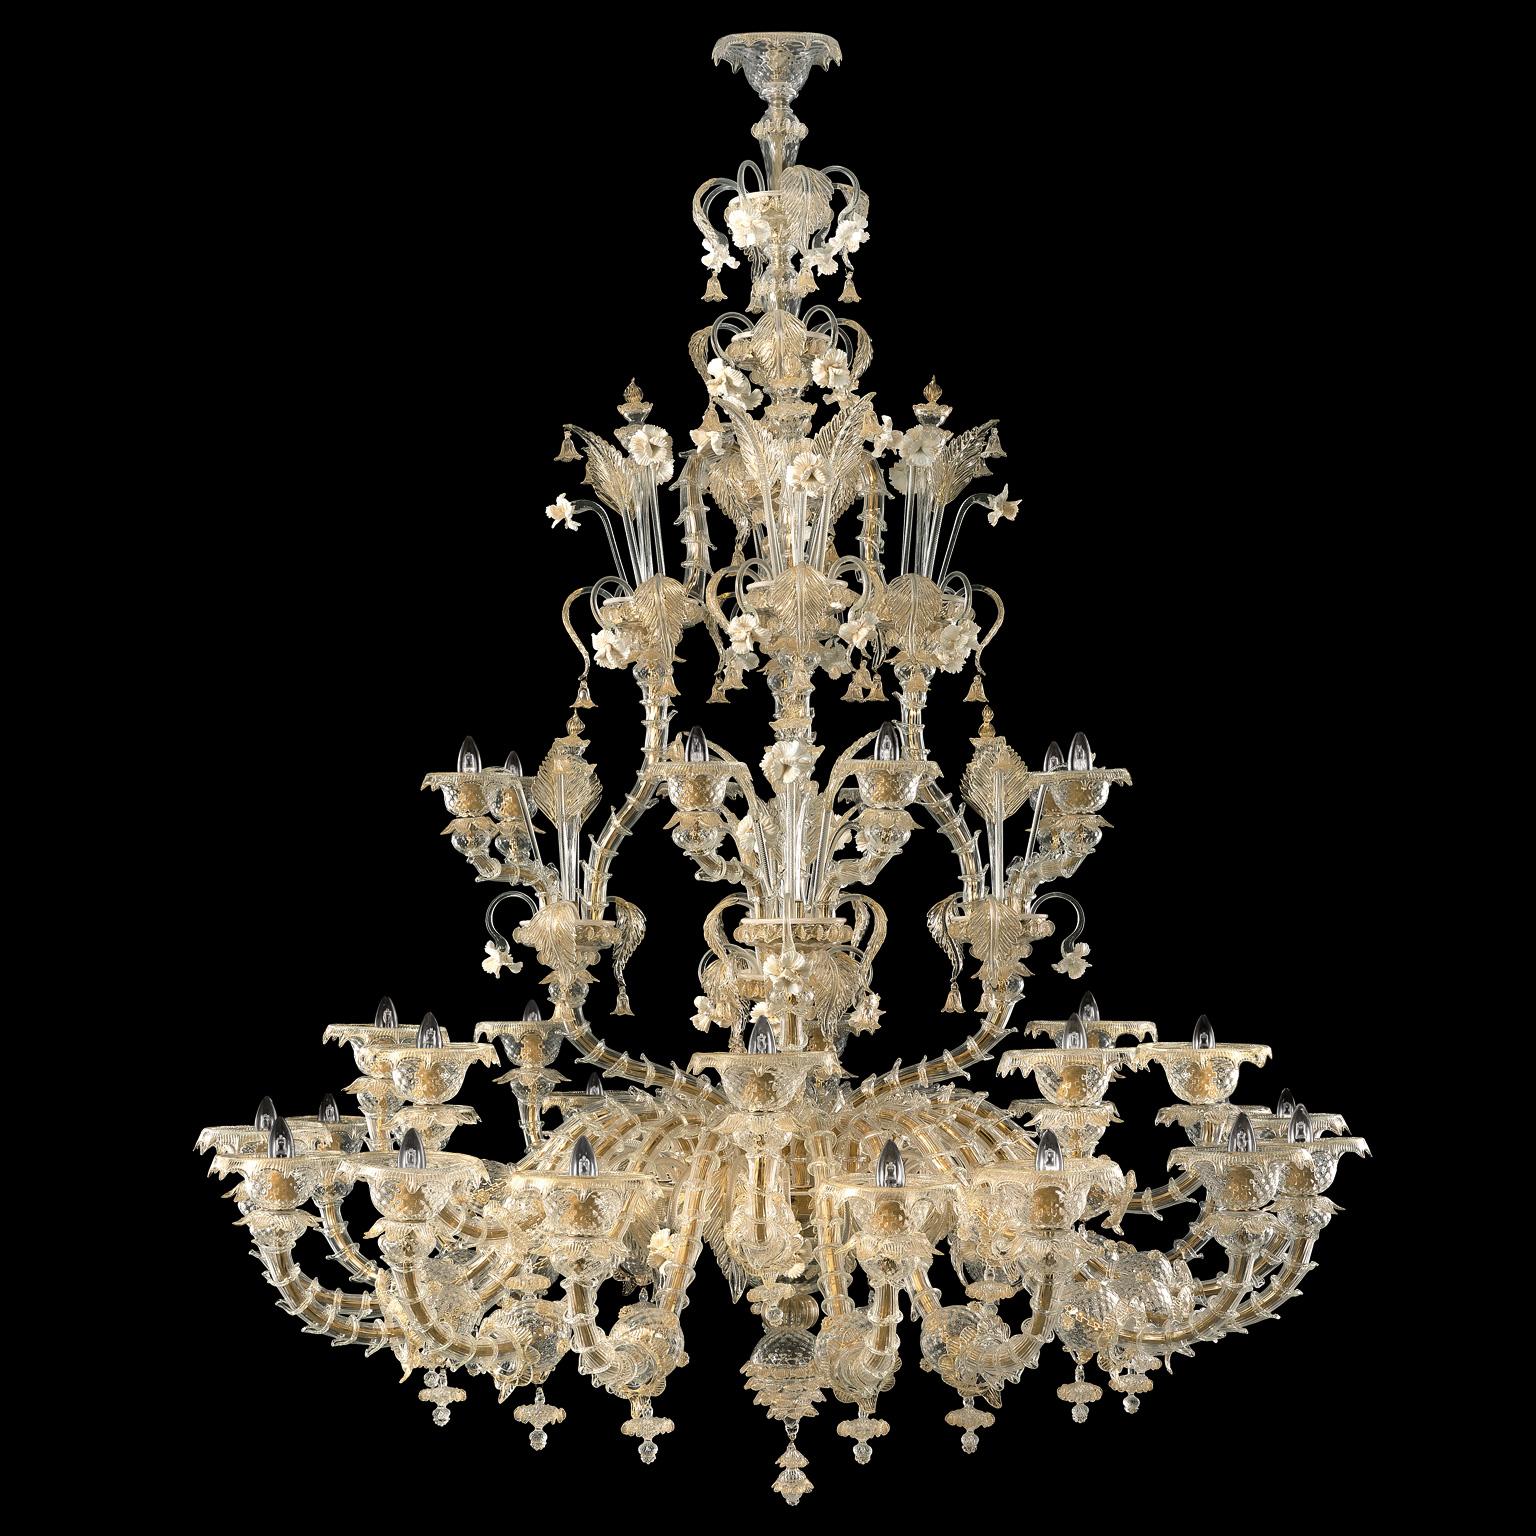 Nabucco chandelier 16+8+8 lights, artistic crystal Murano glass, gold details, white and gold vitreous flowers by Multiforme

Among our collections inspired from the 18th century Venice, the Rezzonico chandelier Nabucco is one of the most majestic.